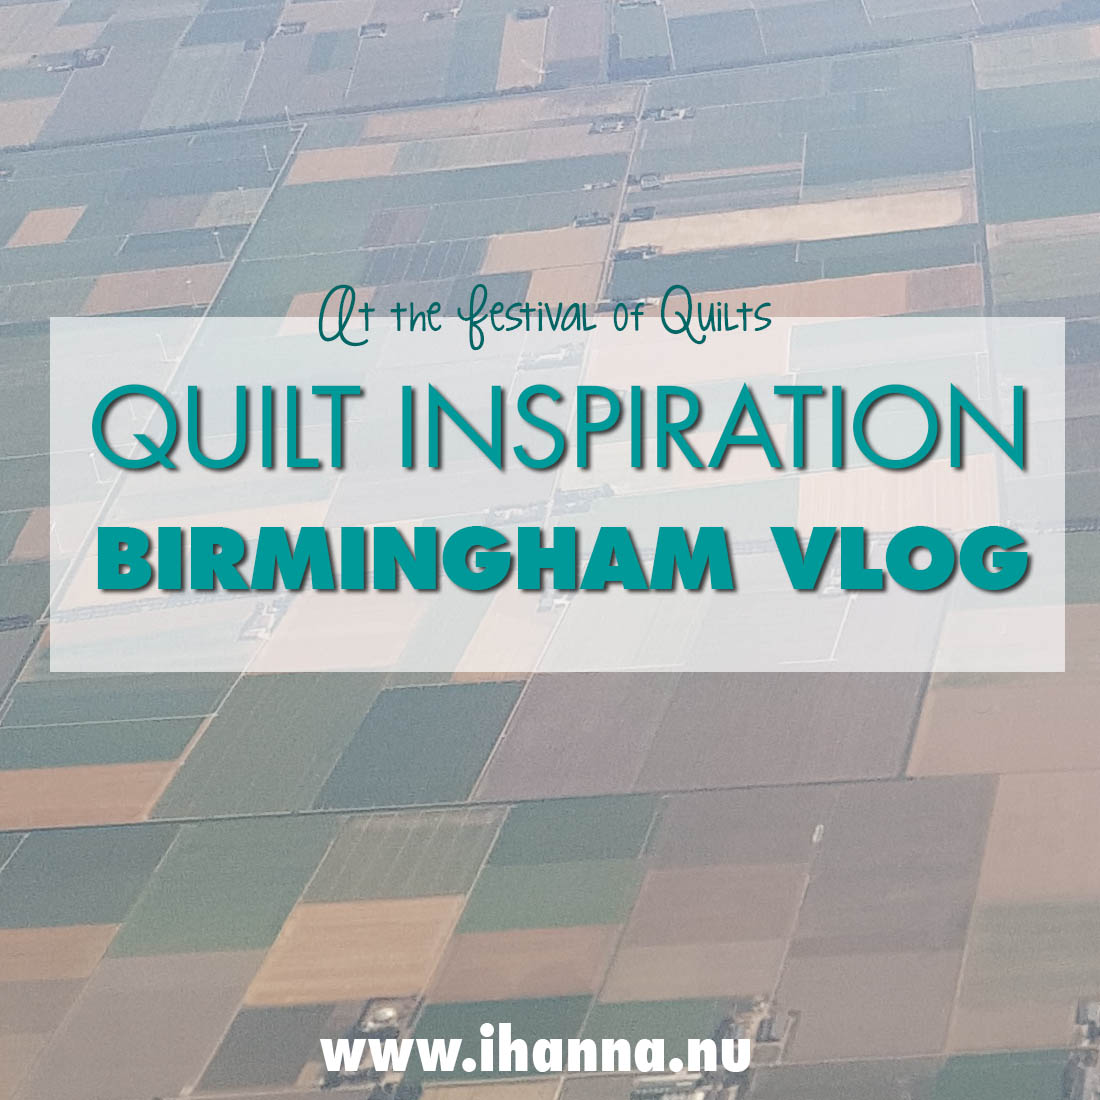 Vlog from Birmingham and Festival of Quilts 2018 by iHanna